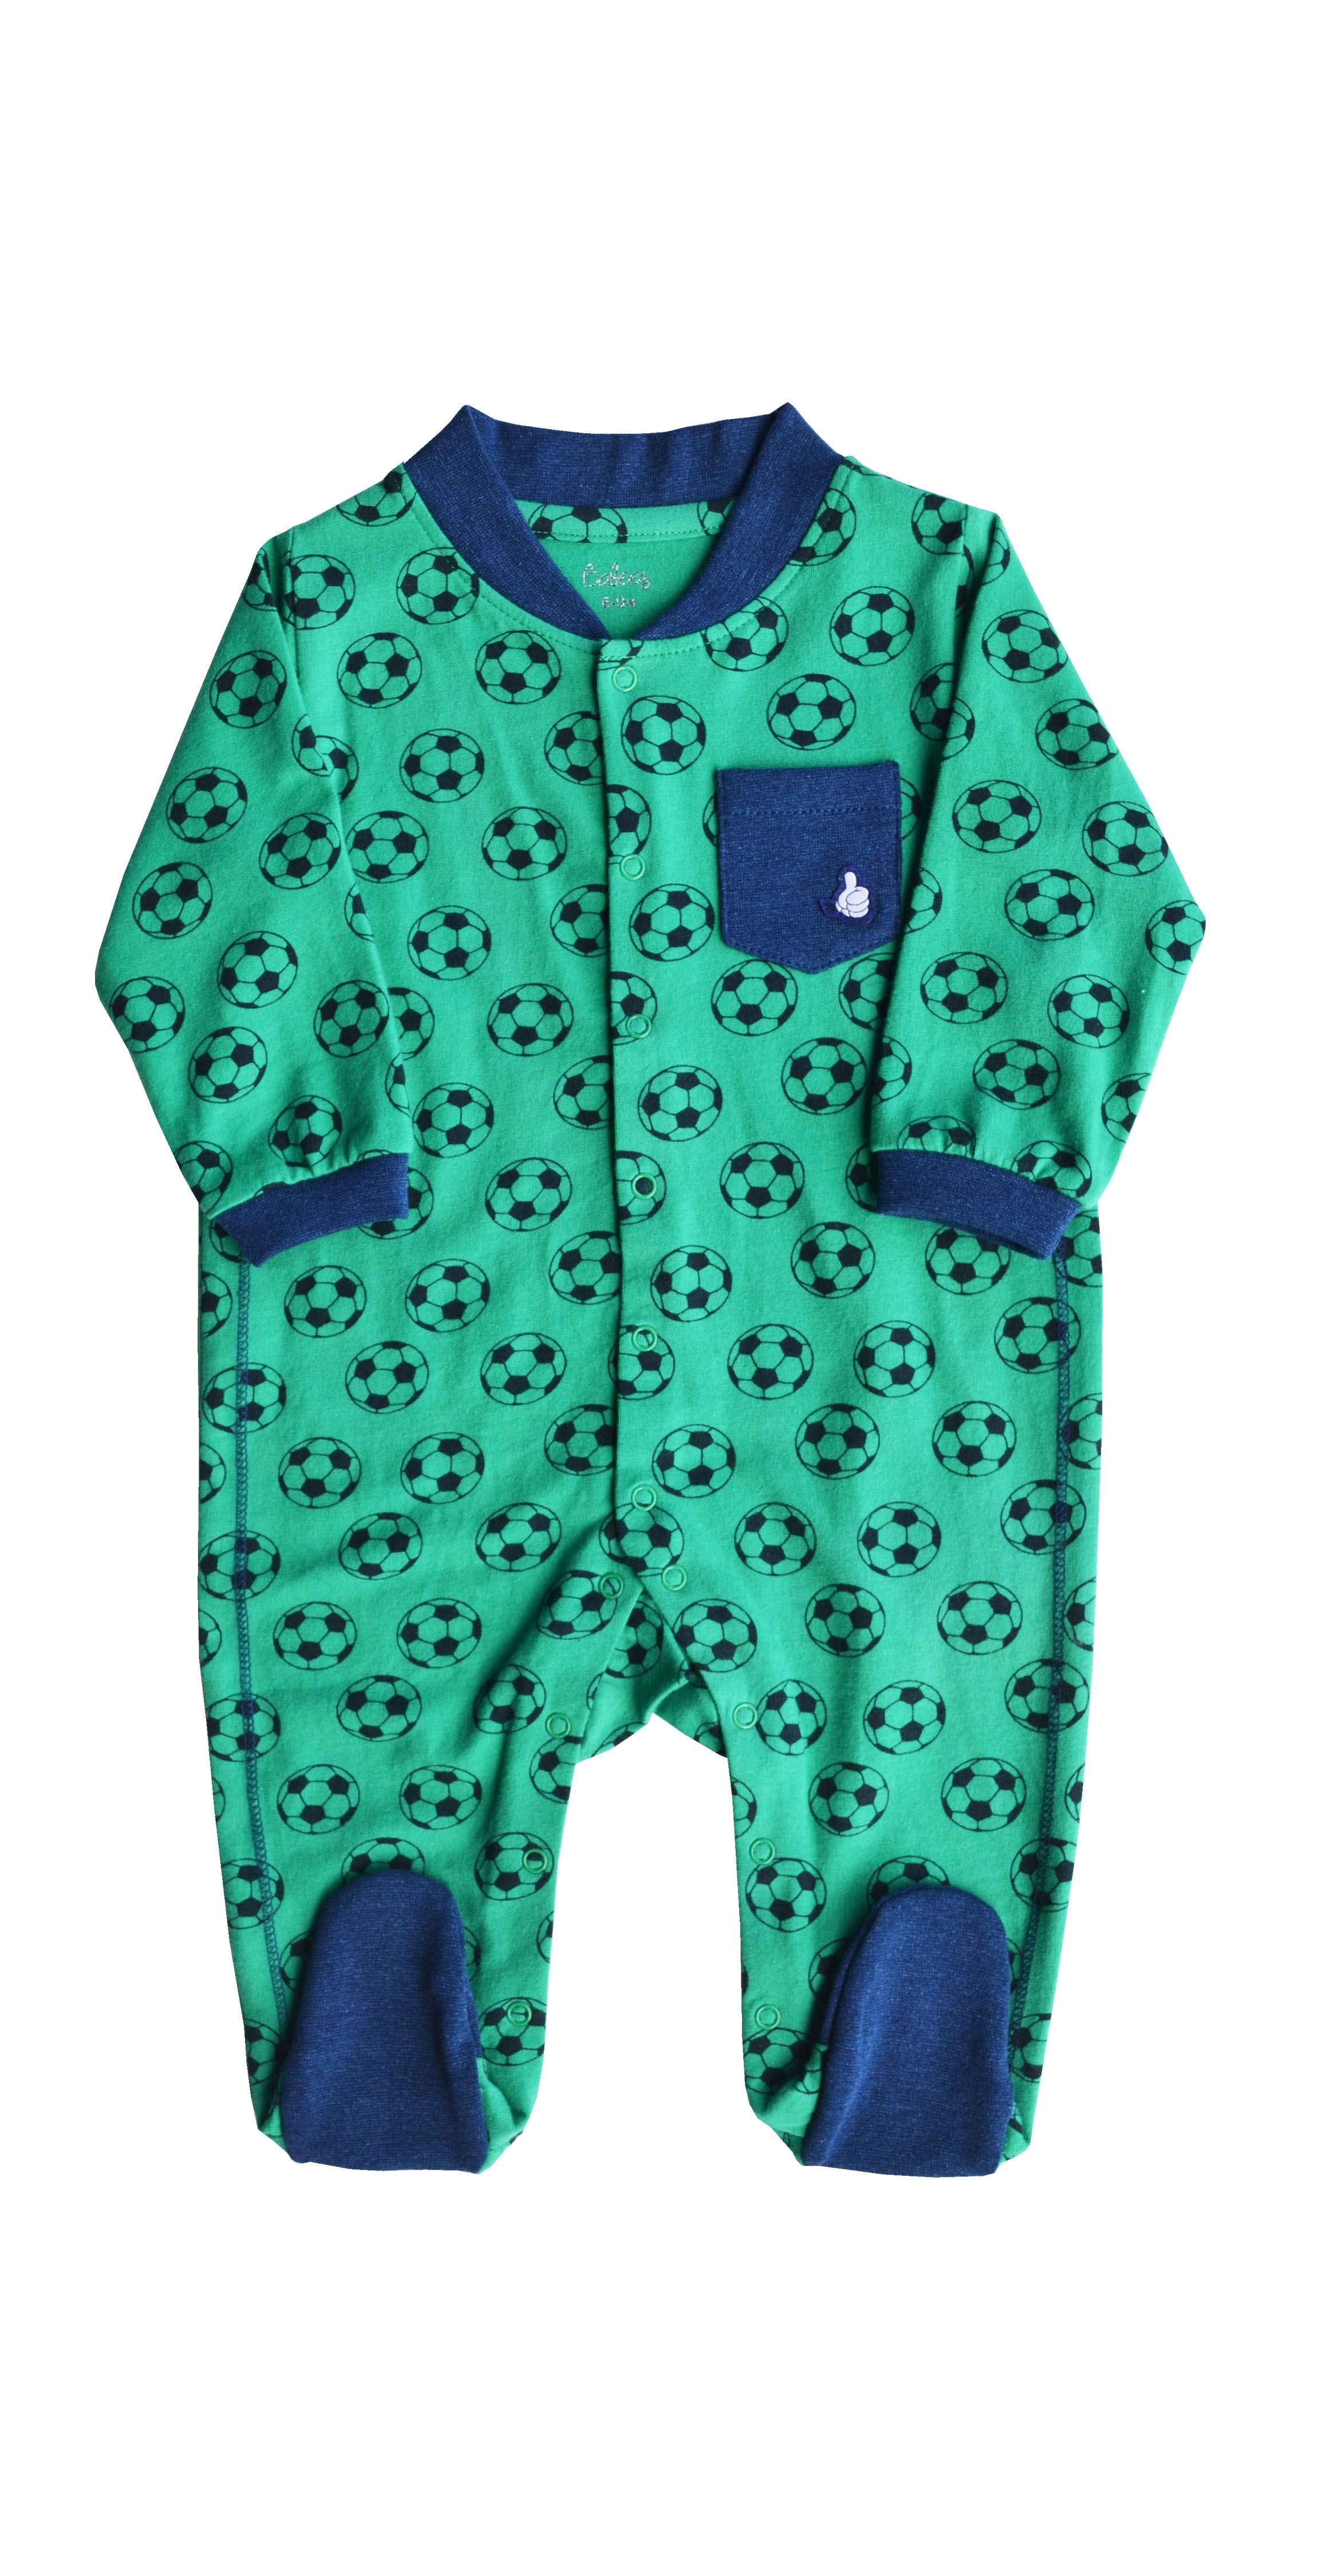 Babeez | Allover Football Print on Green Sleeper with Fee(95% Cotton 5% Elasthan SJ) undefined